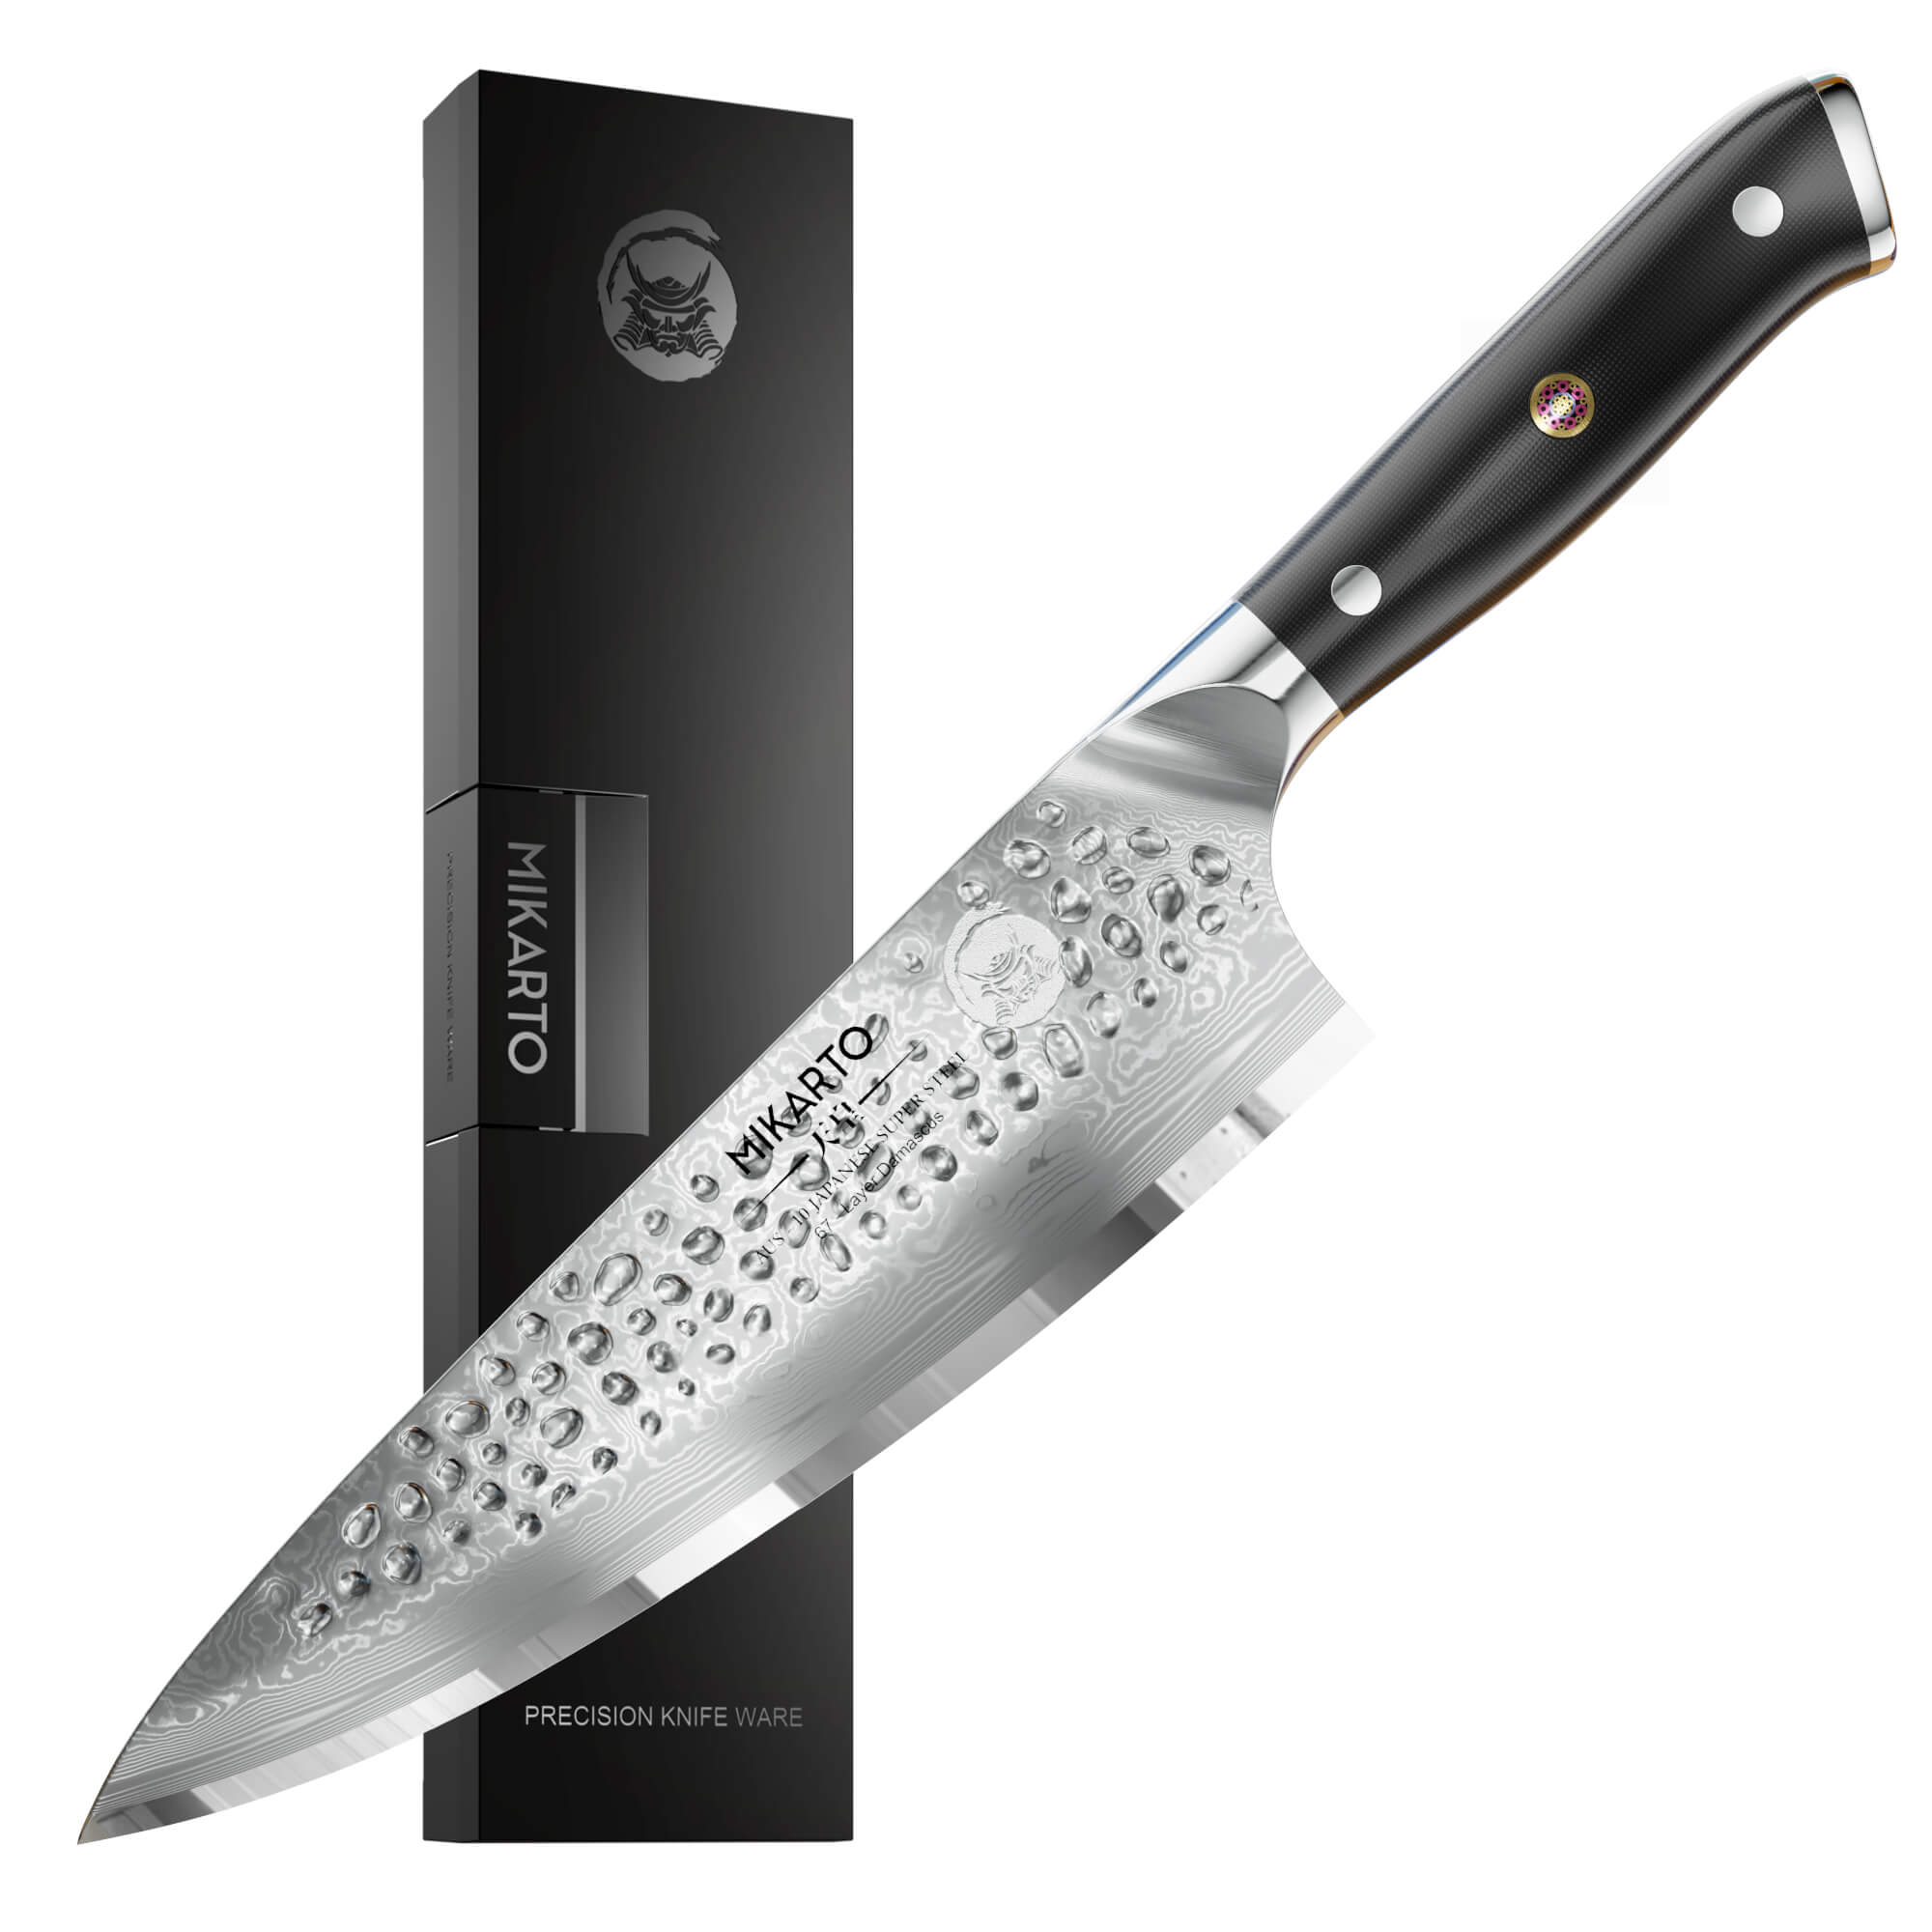 KEEMAKE Chef Knife 8 Inch High Carbon Stainless Steel Japanese